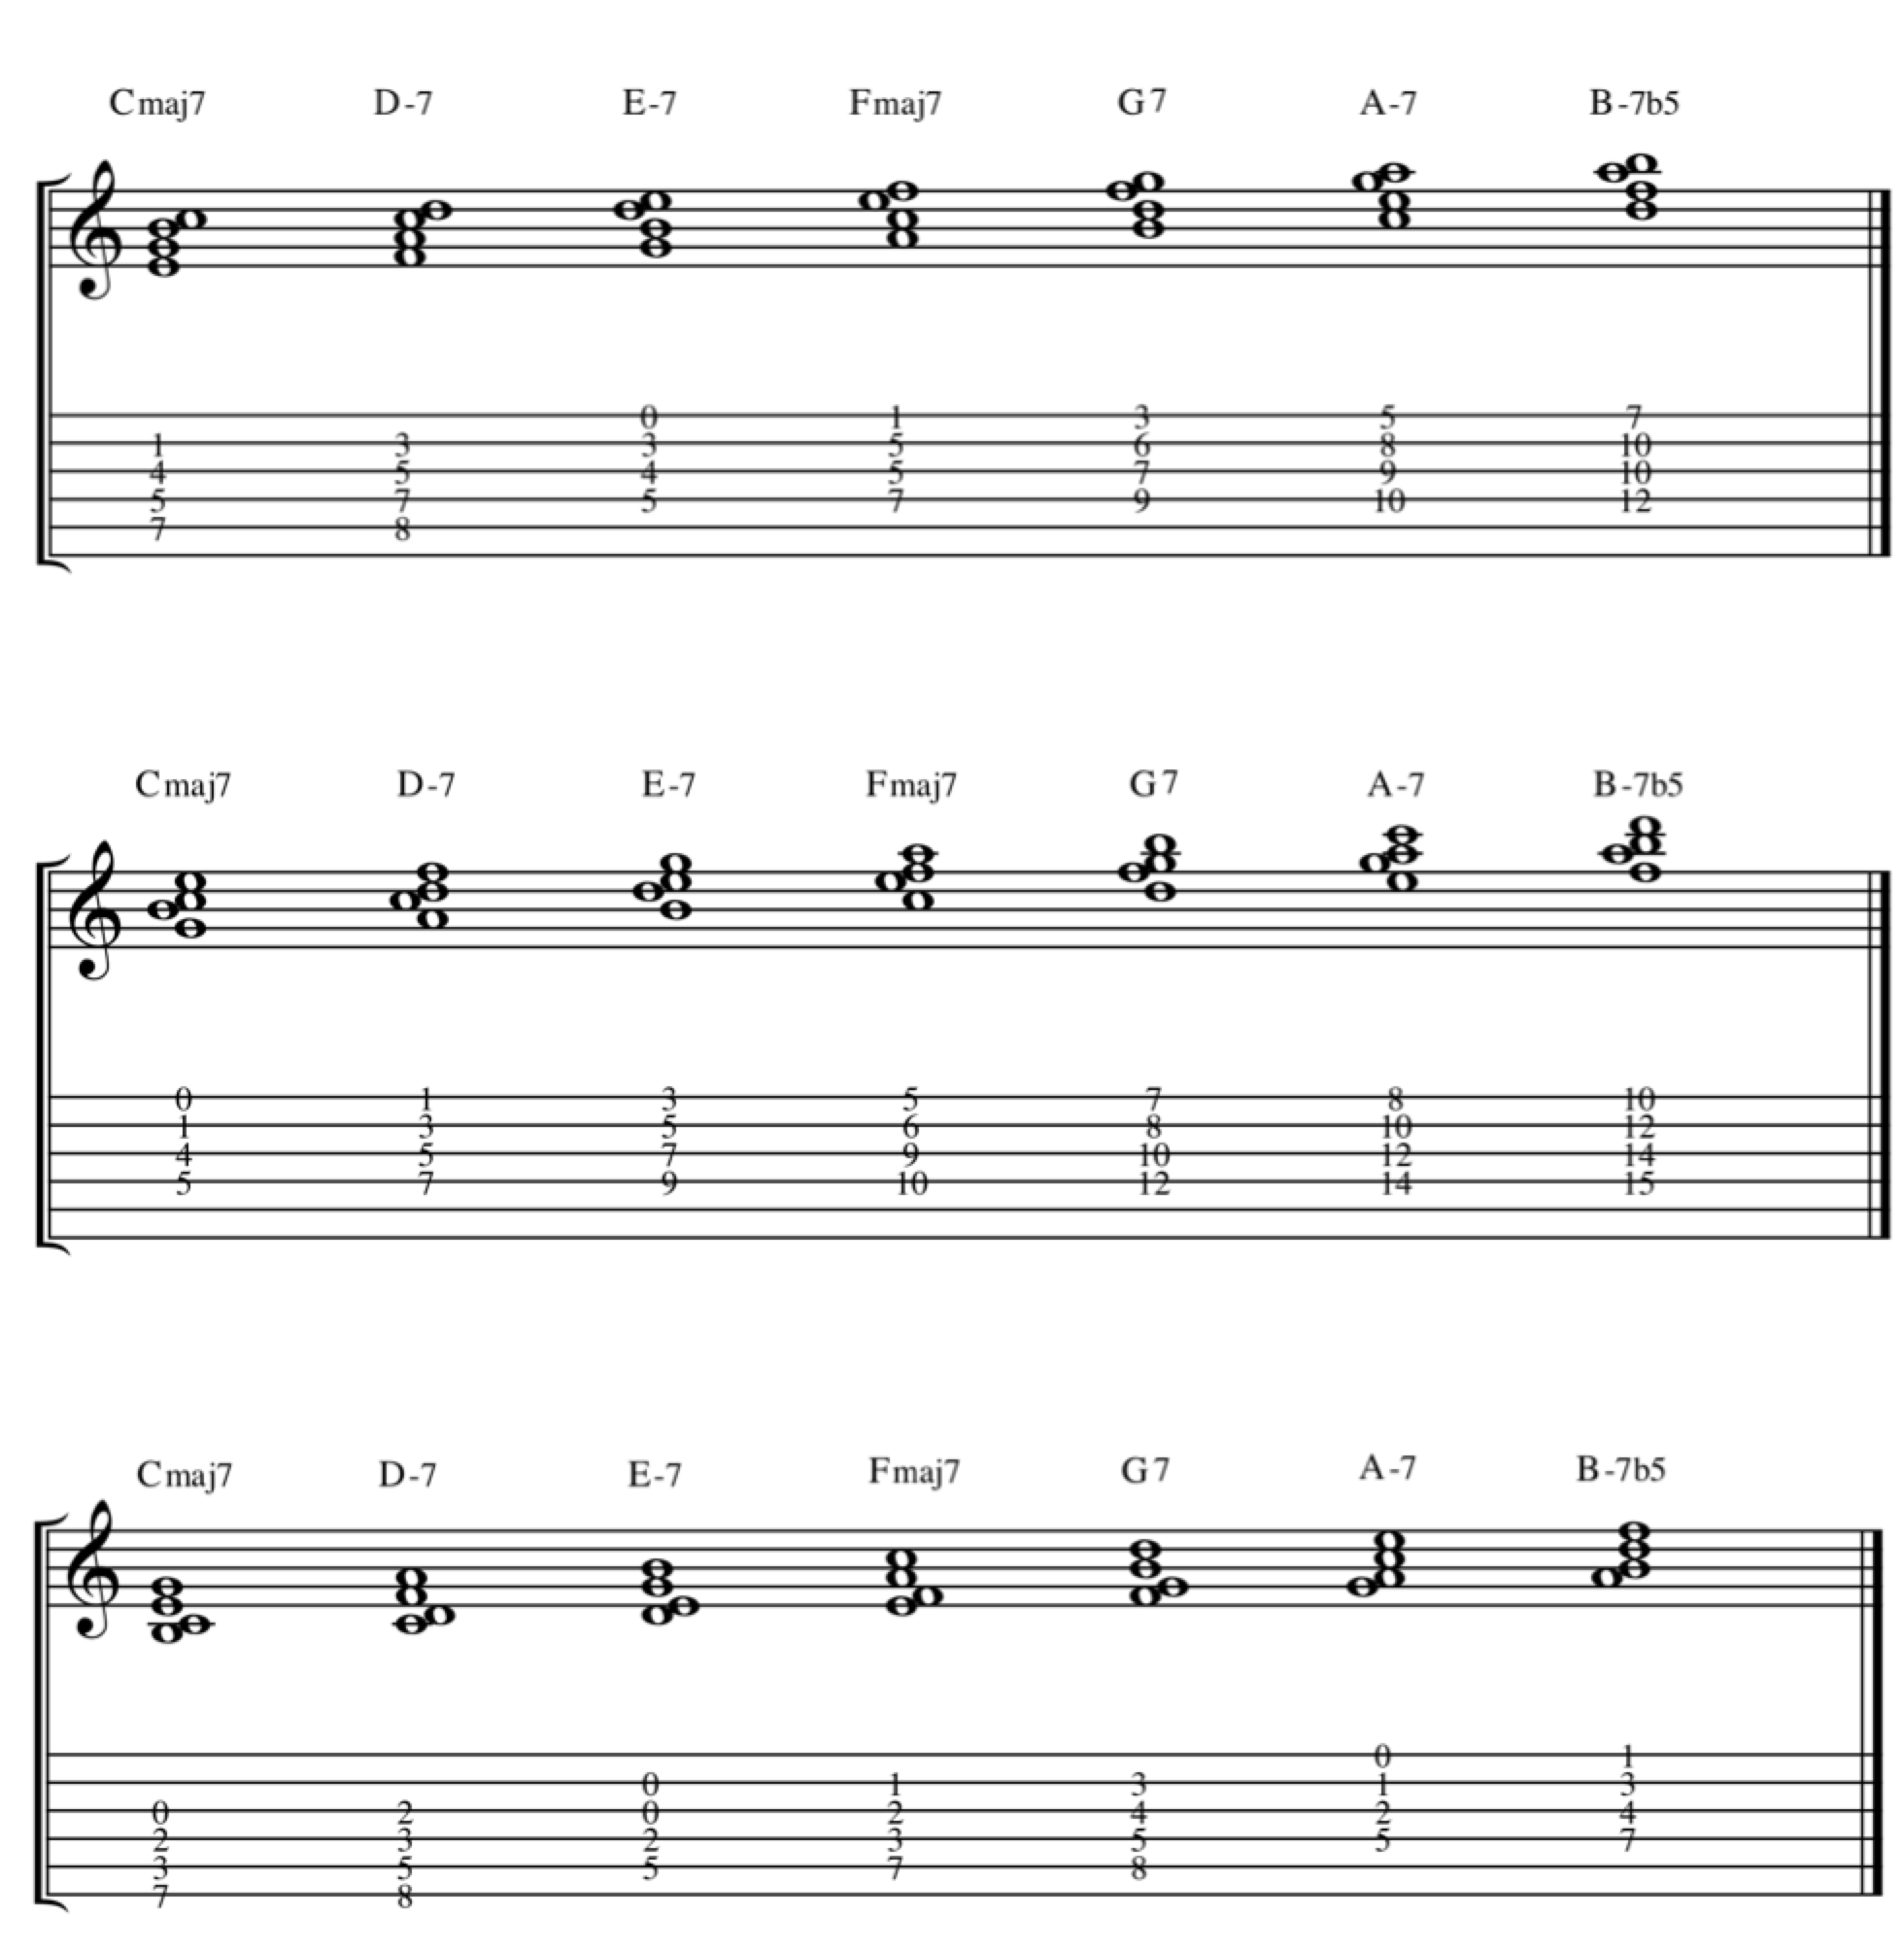 3rd, 5th and 7th in the bass closed voicings for all chords in the key of C. 